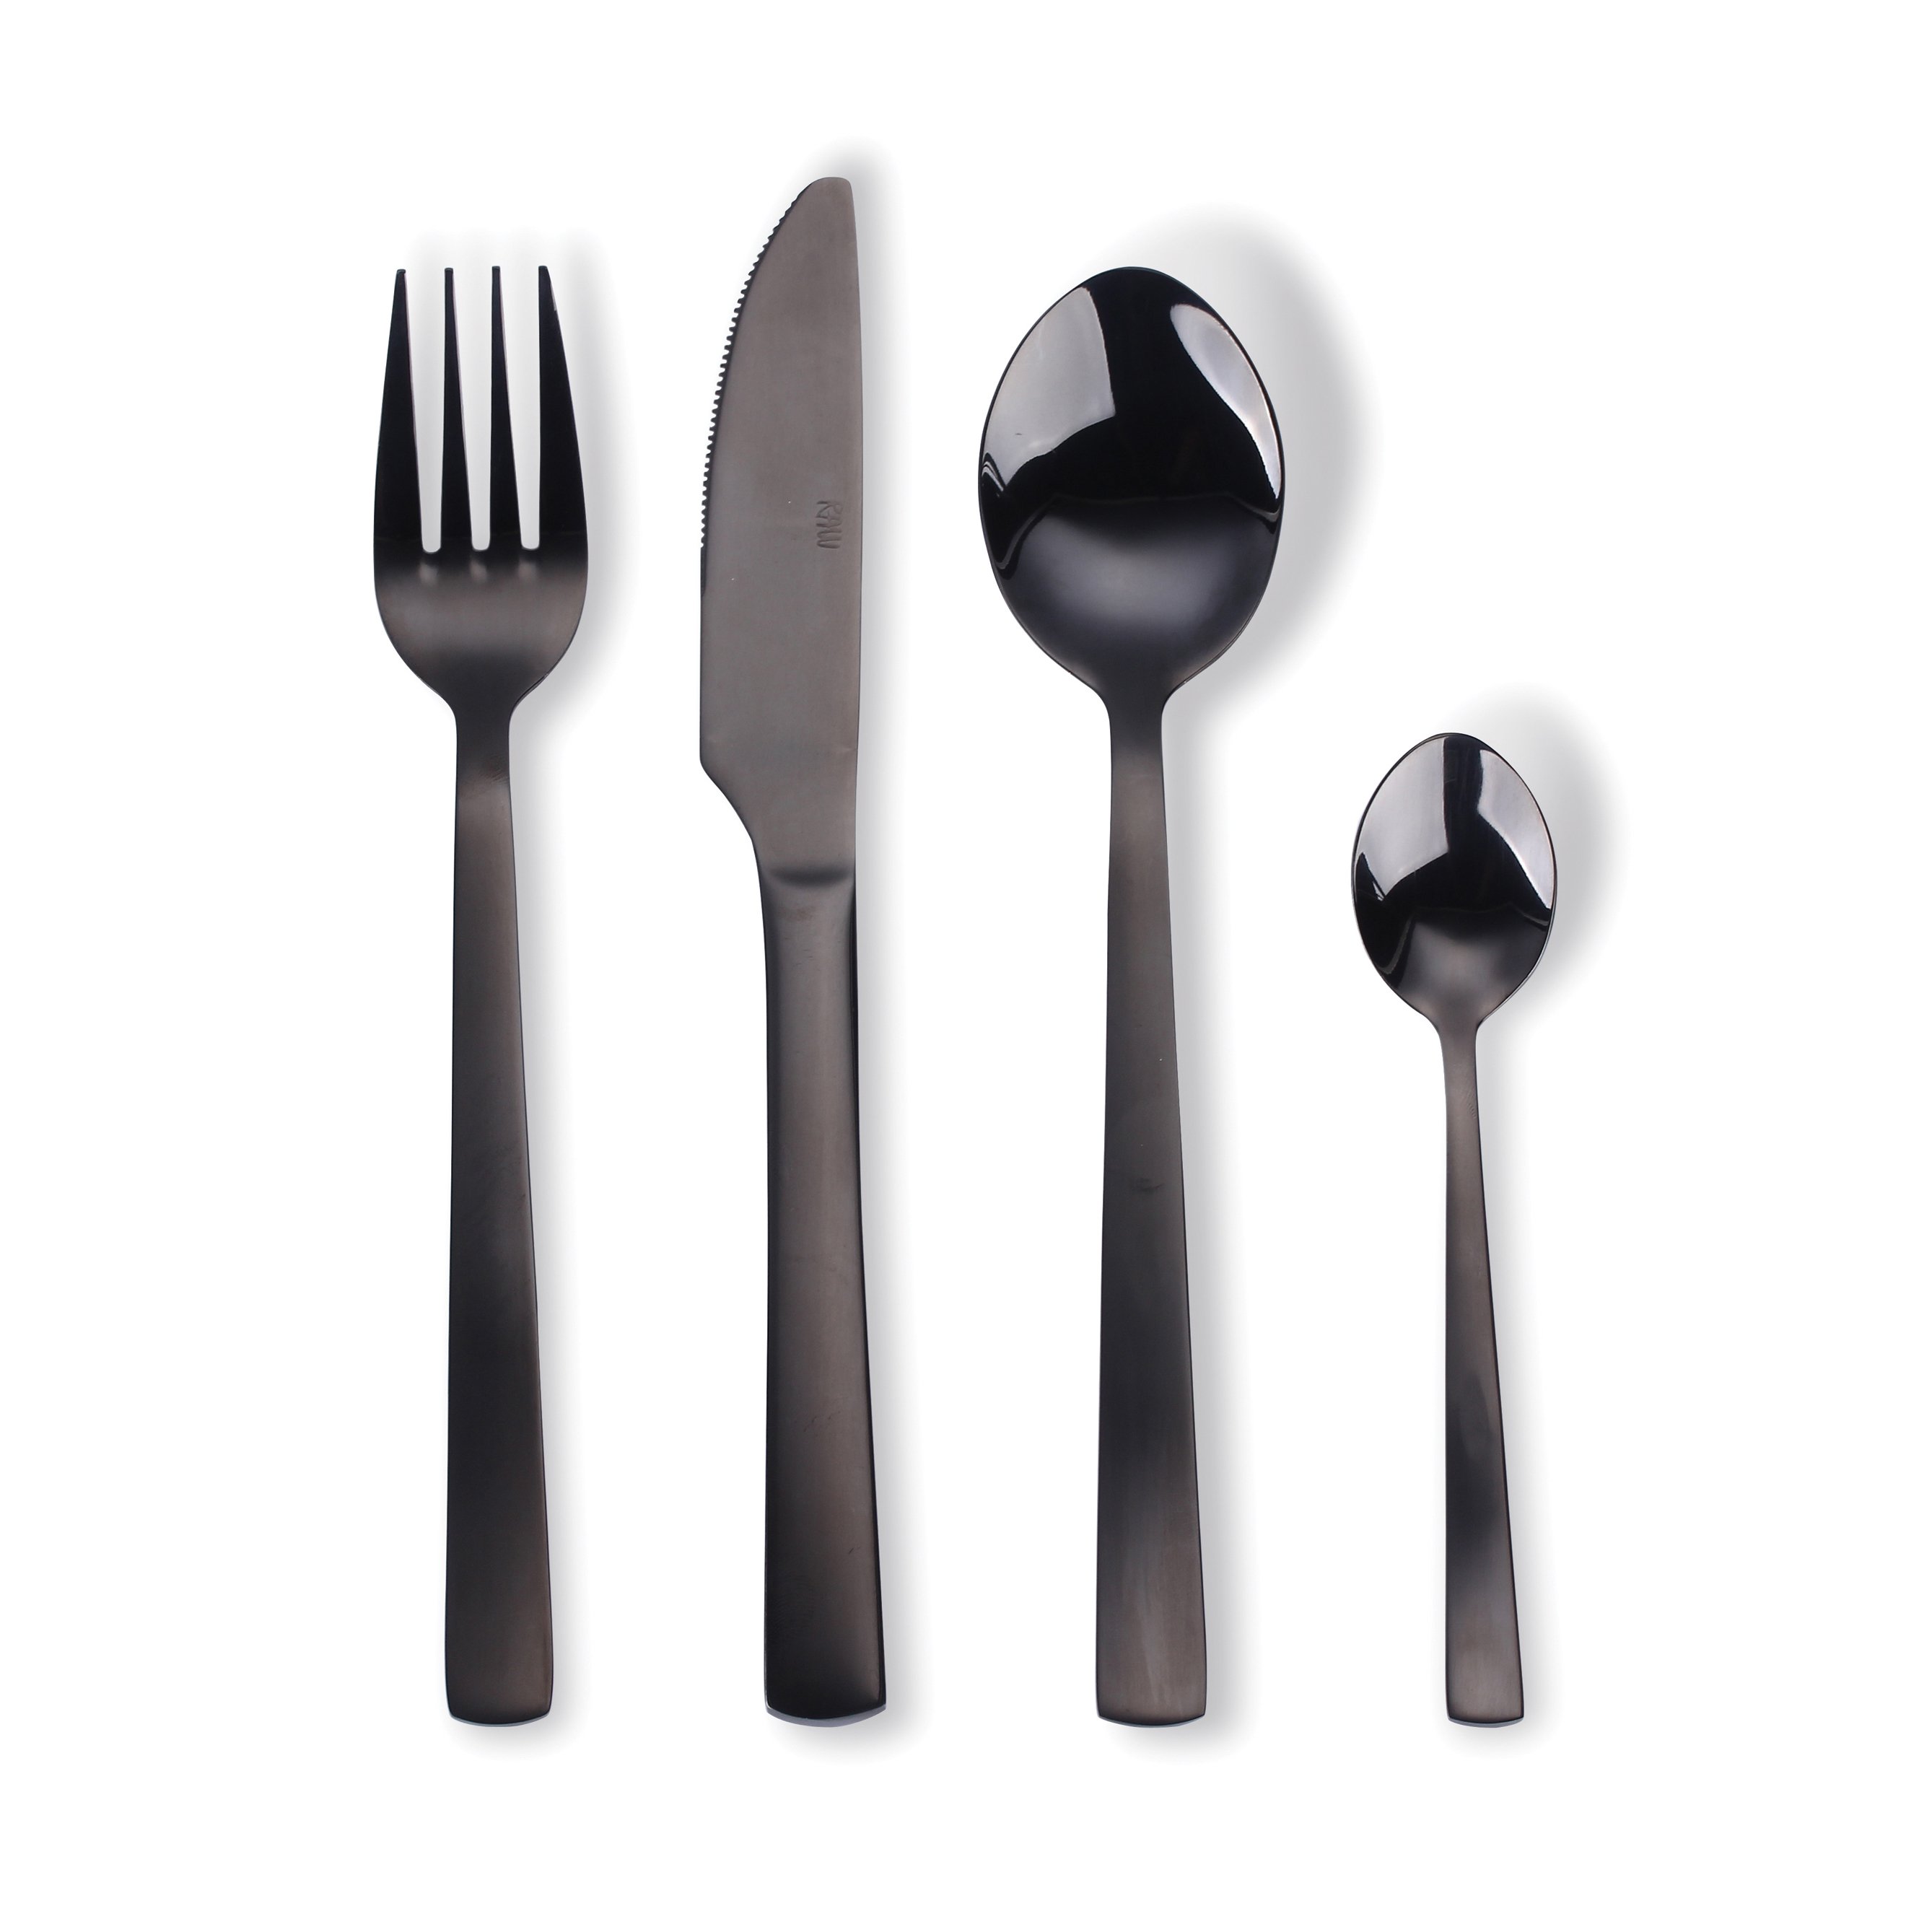 Maddadapt II 4-Piece Built-Up Cutlery Set for Those with Limited Gri